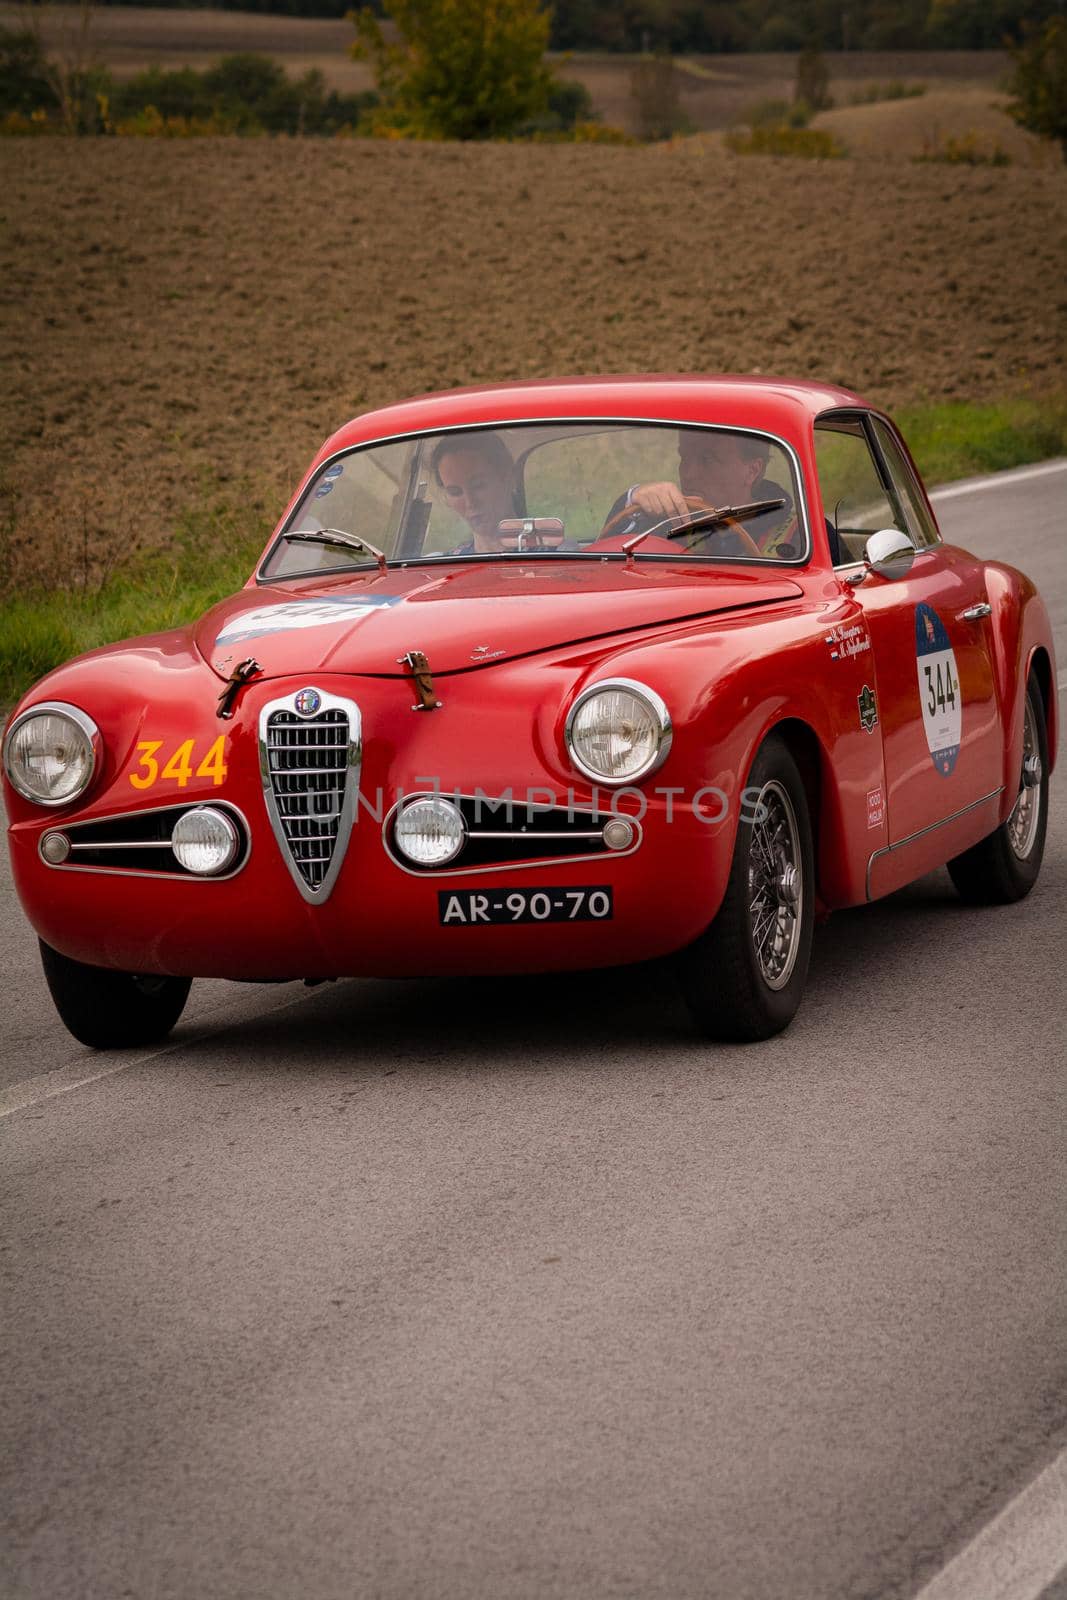 ALFA ROMEO 1900 C SUPER SPRINT TOURING 1955 on an old racing car in rally Mille Miglia 2020 the famous italian historical race (1927-1957) by massimocampanari